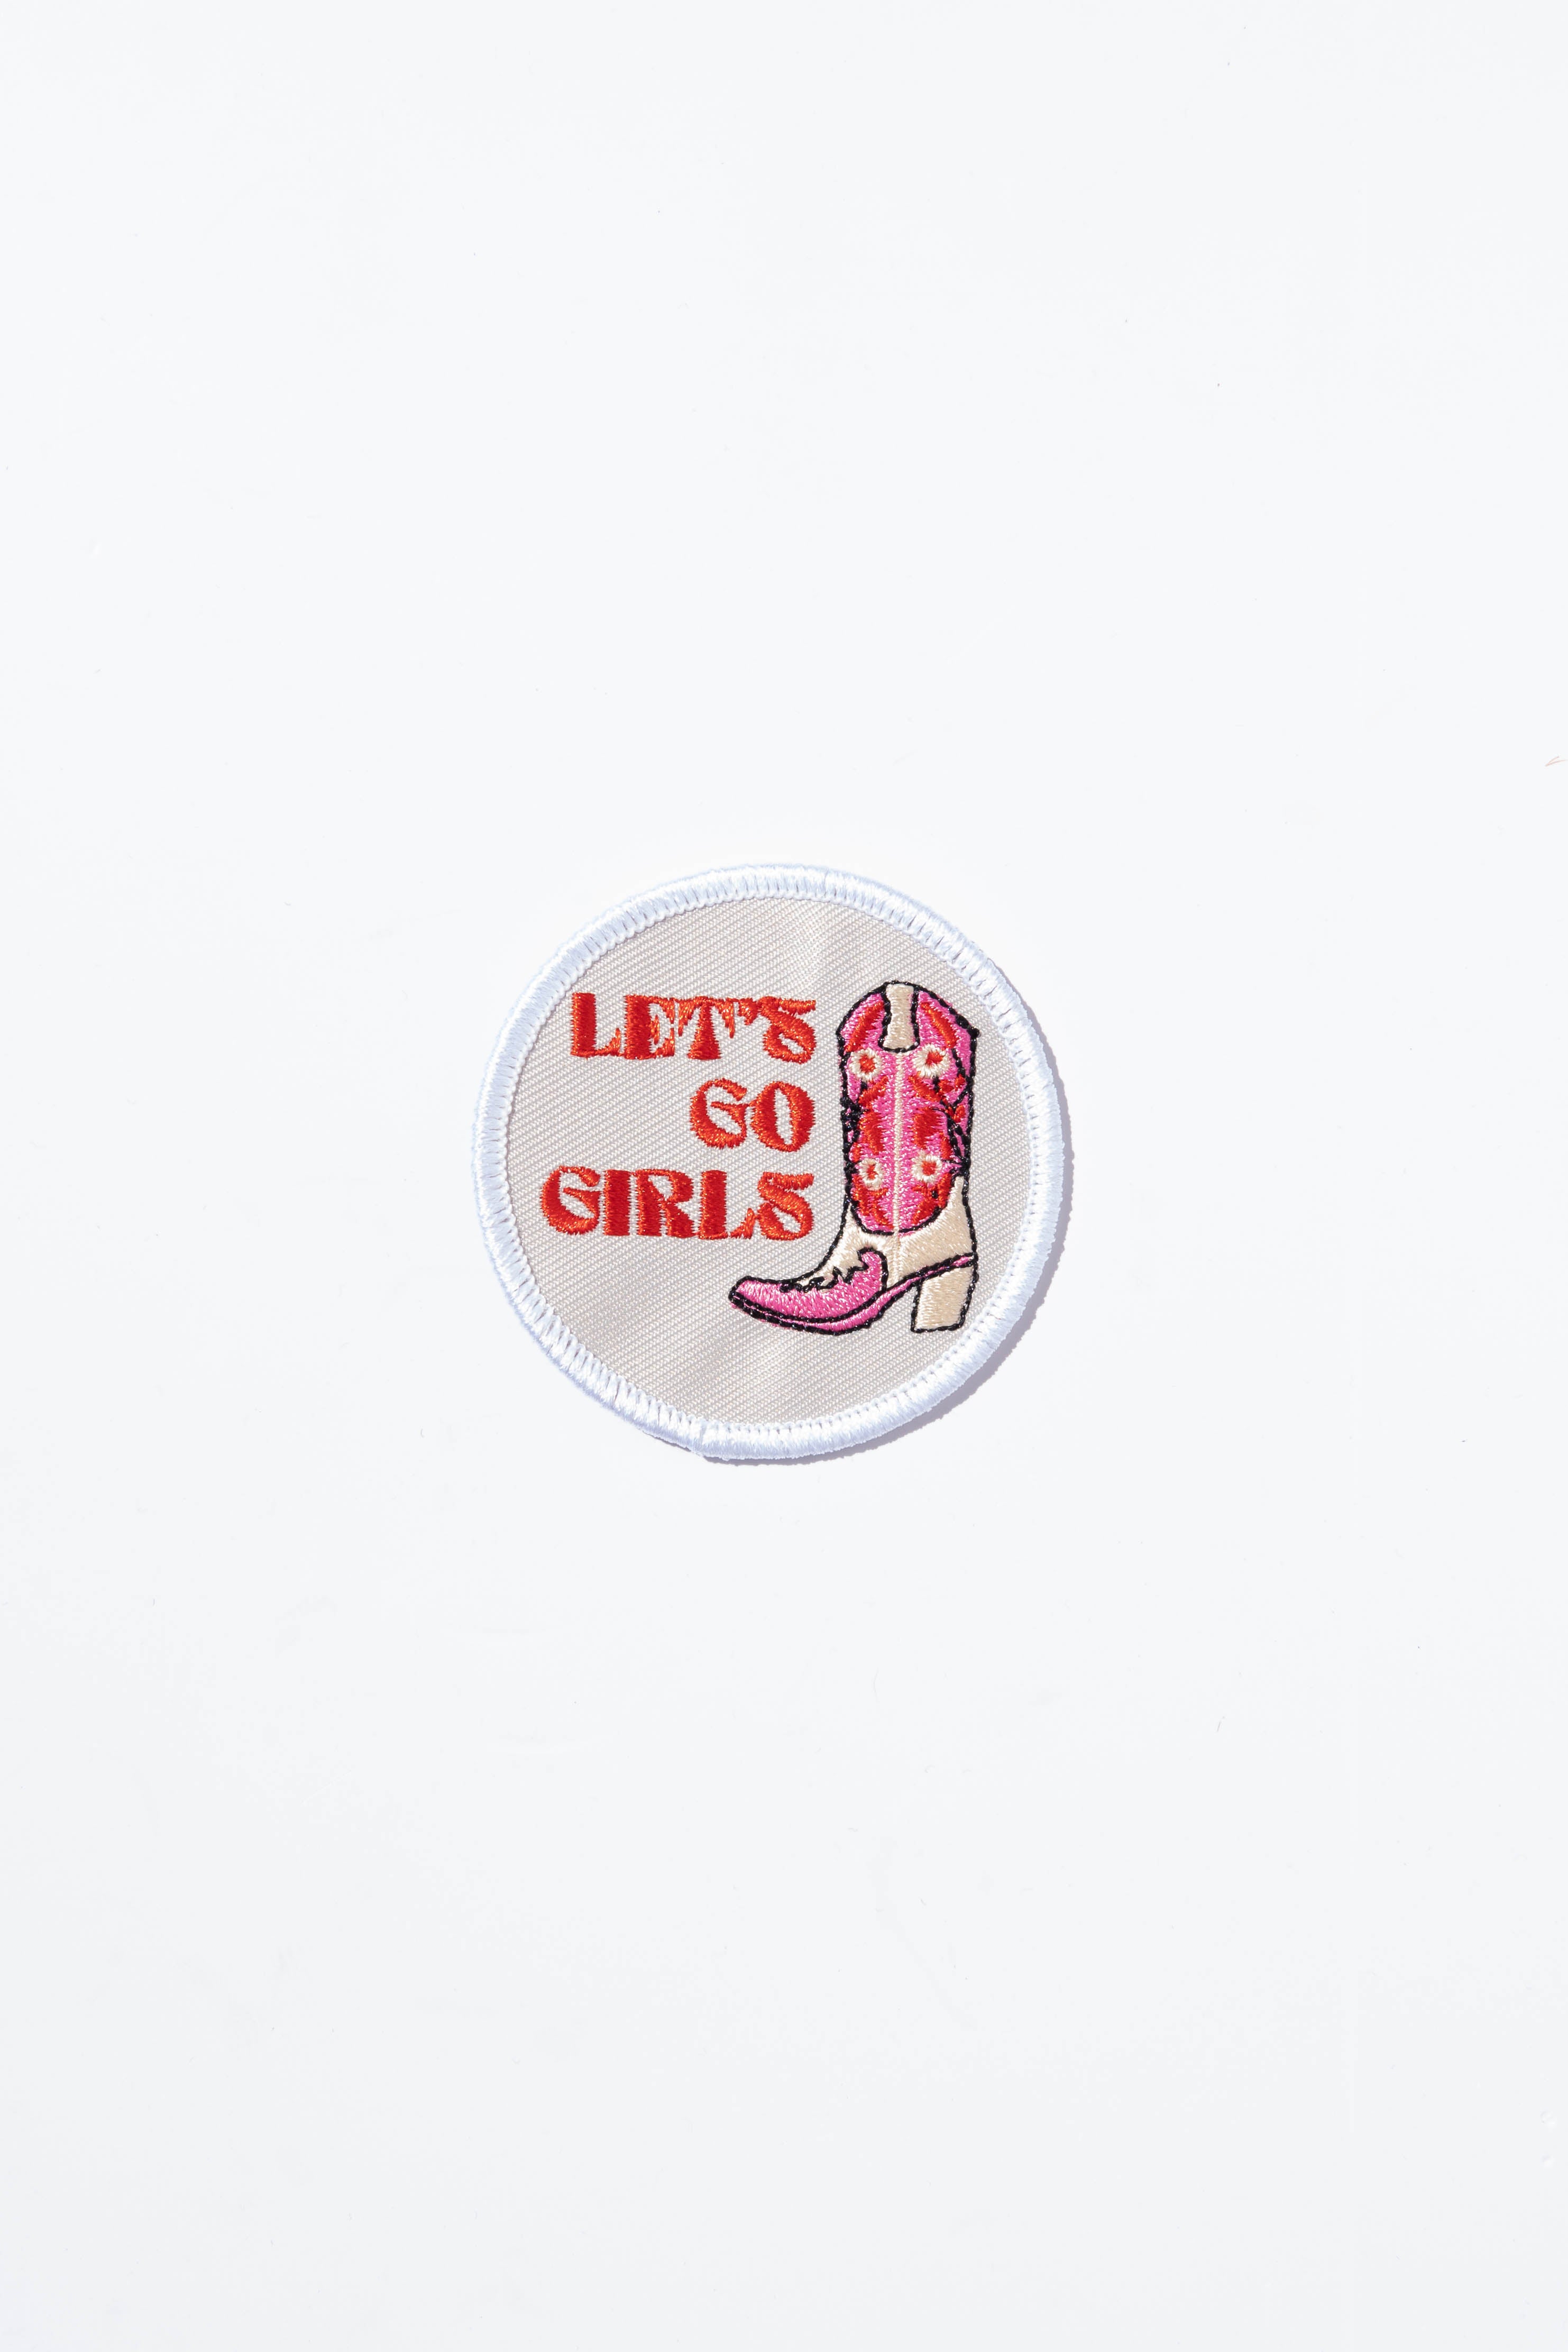 Let's Go Girls Patch